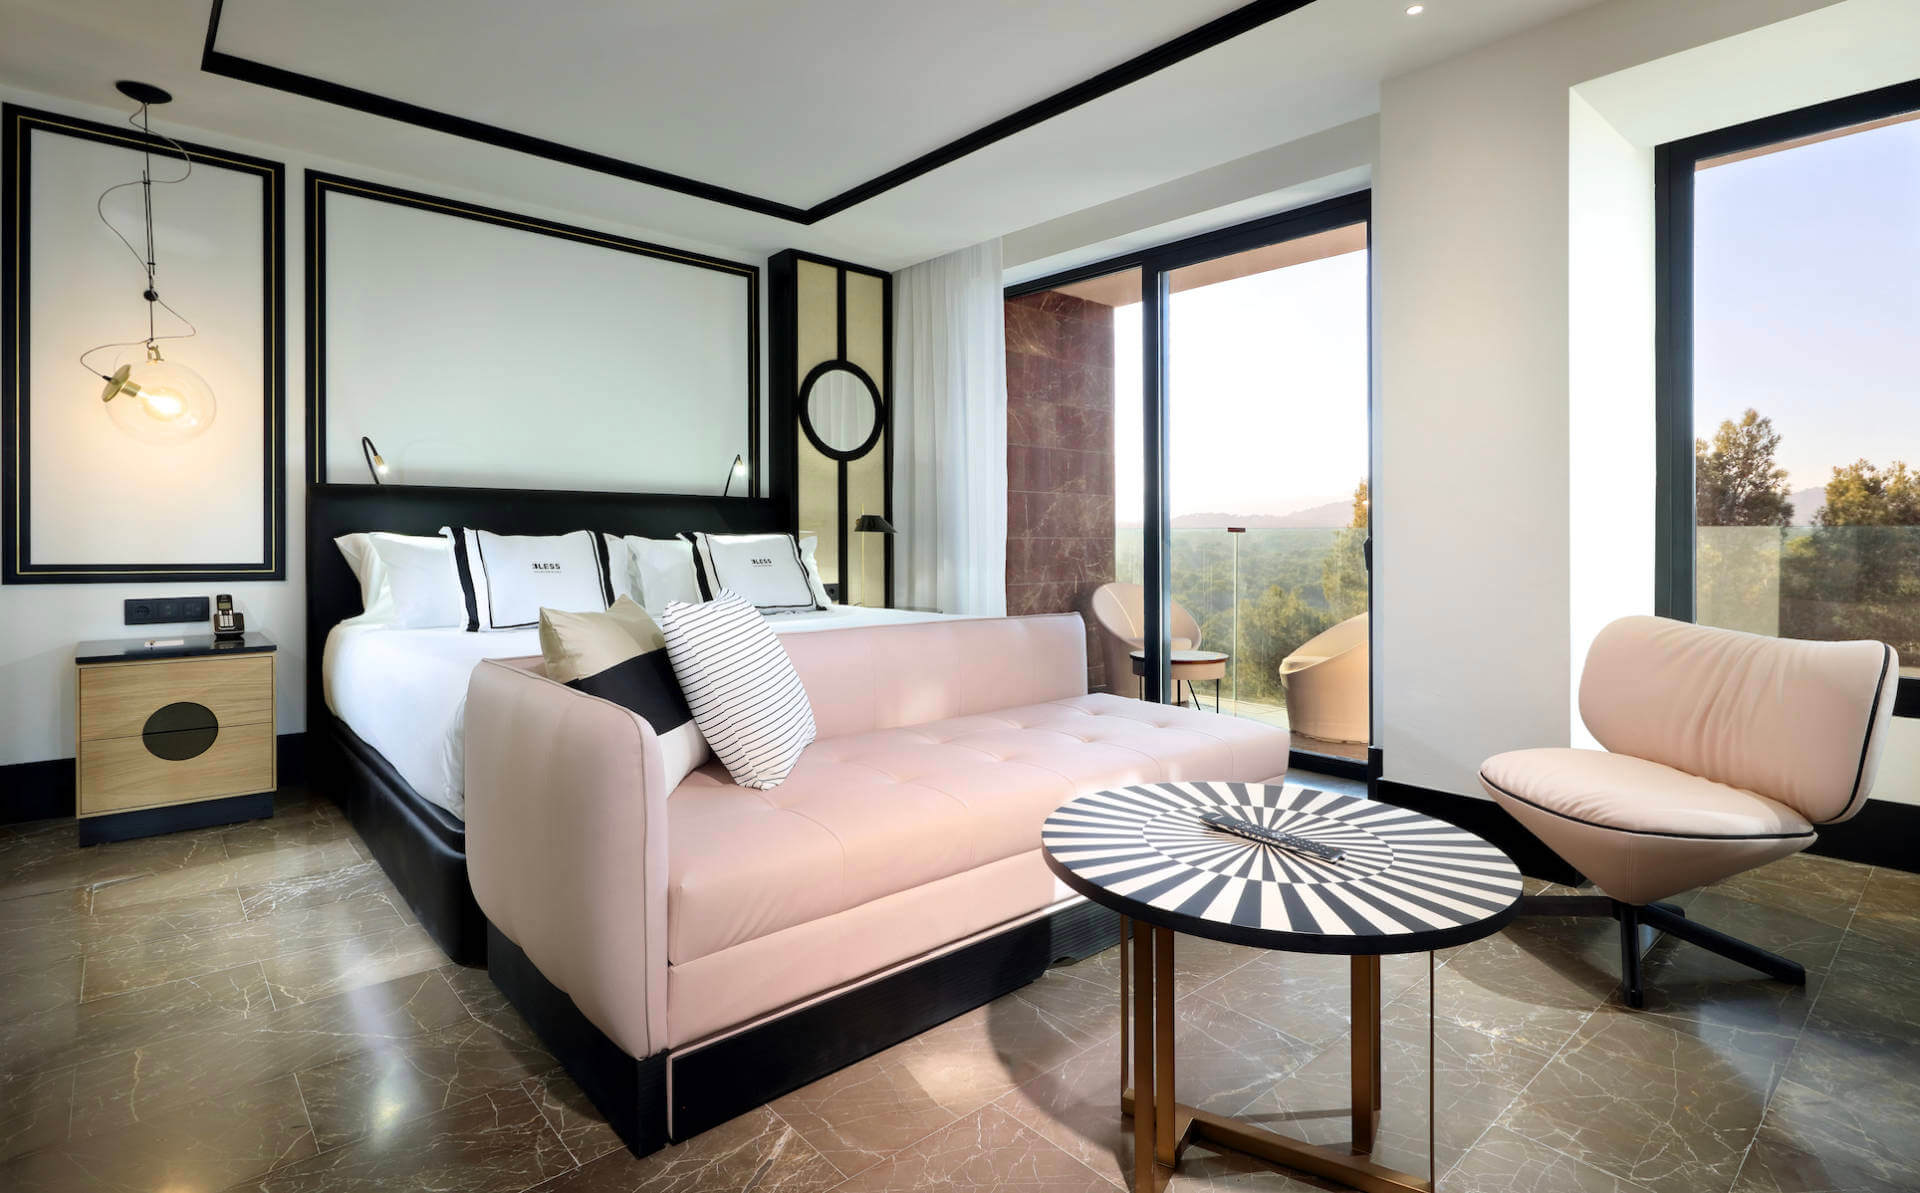 LUXURIA LIFESTYLE SPAIN WELCOMES BLESS HOTEL MADRID